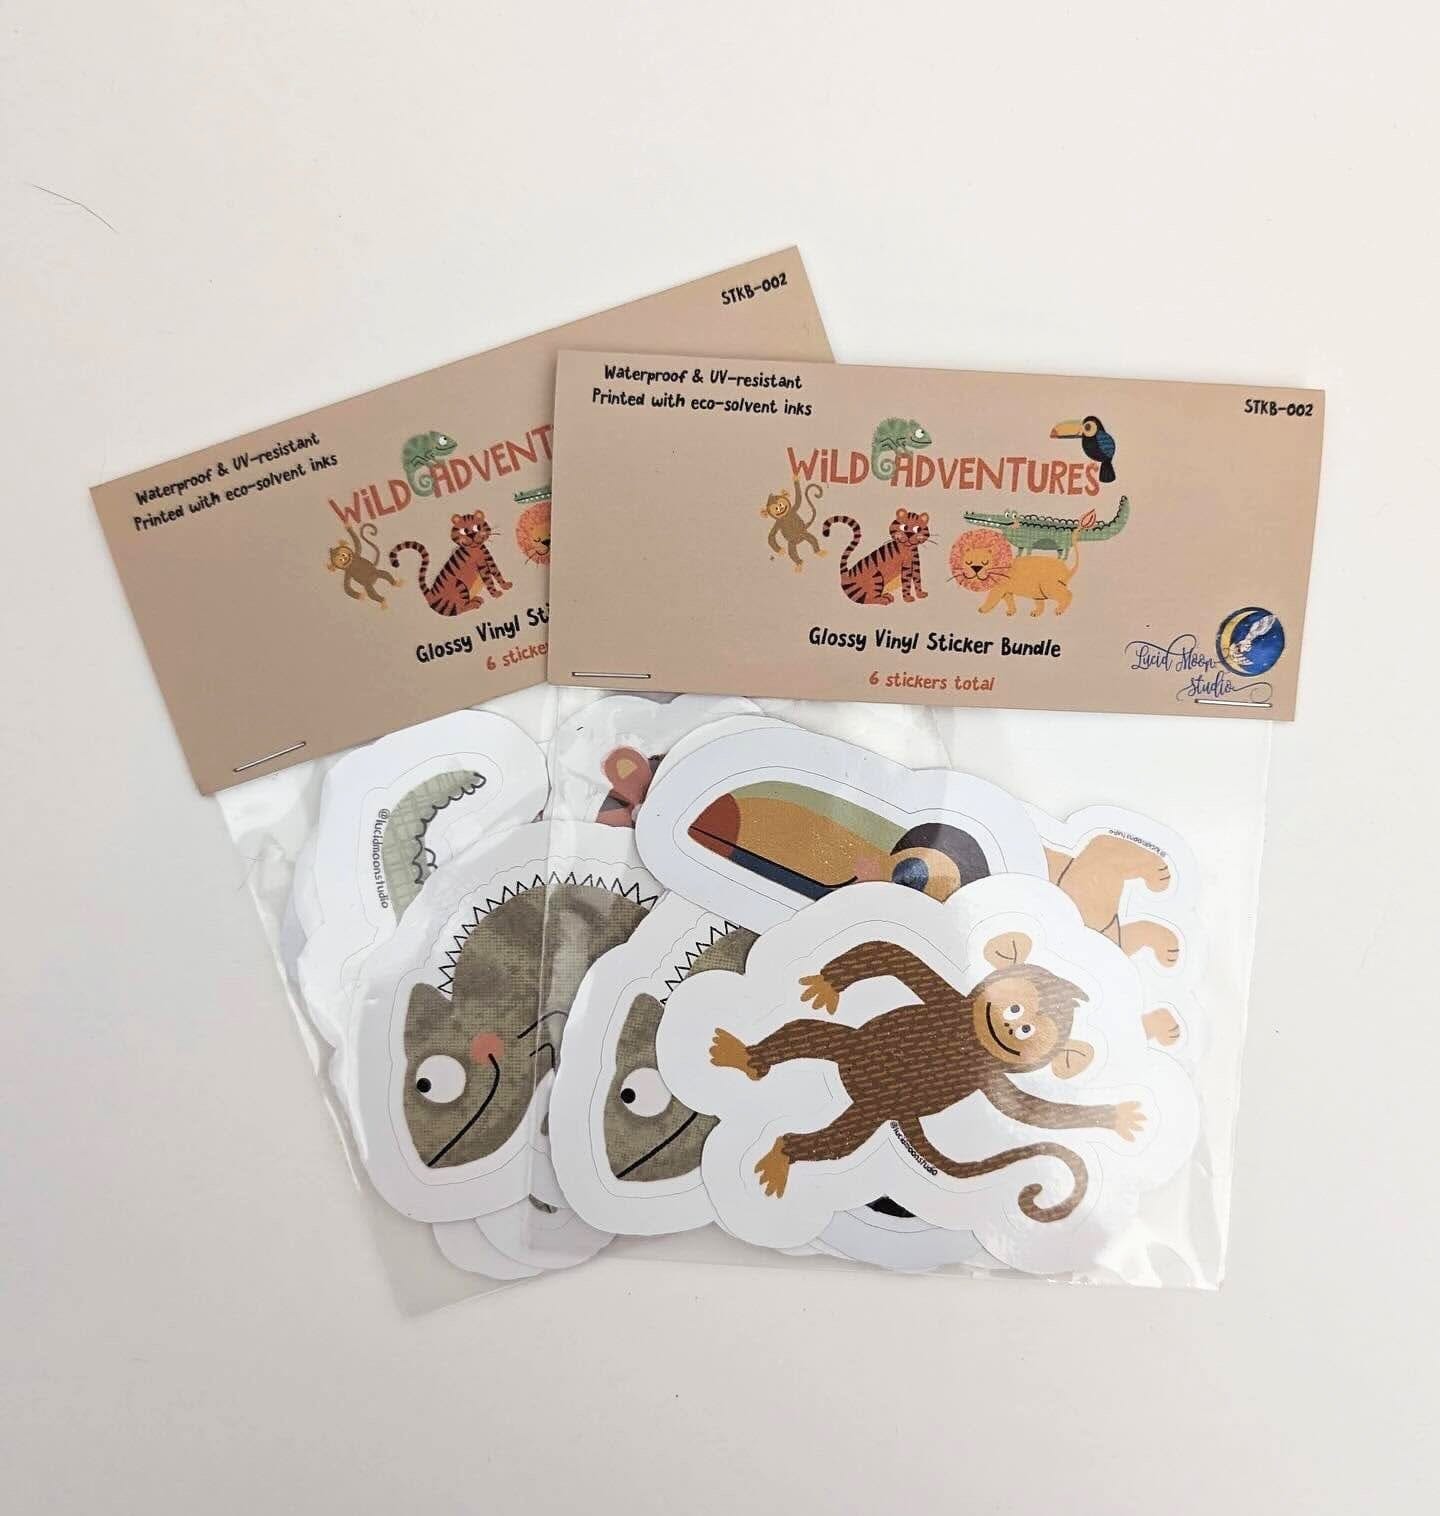 A photo of 2 Wild Adventures sticker bundle packs, each containing 6 glossy waterproof vinyl sticker designs that include a crocodile, chameleon, monkey, toucan, lion, and tiger packaged in a clear PLA certified compostable bag with cardstock label.